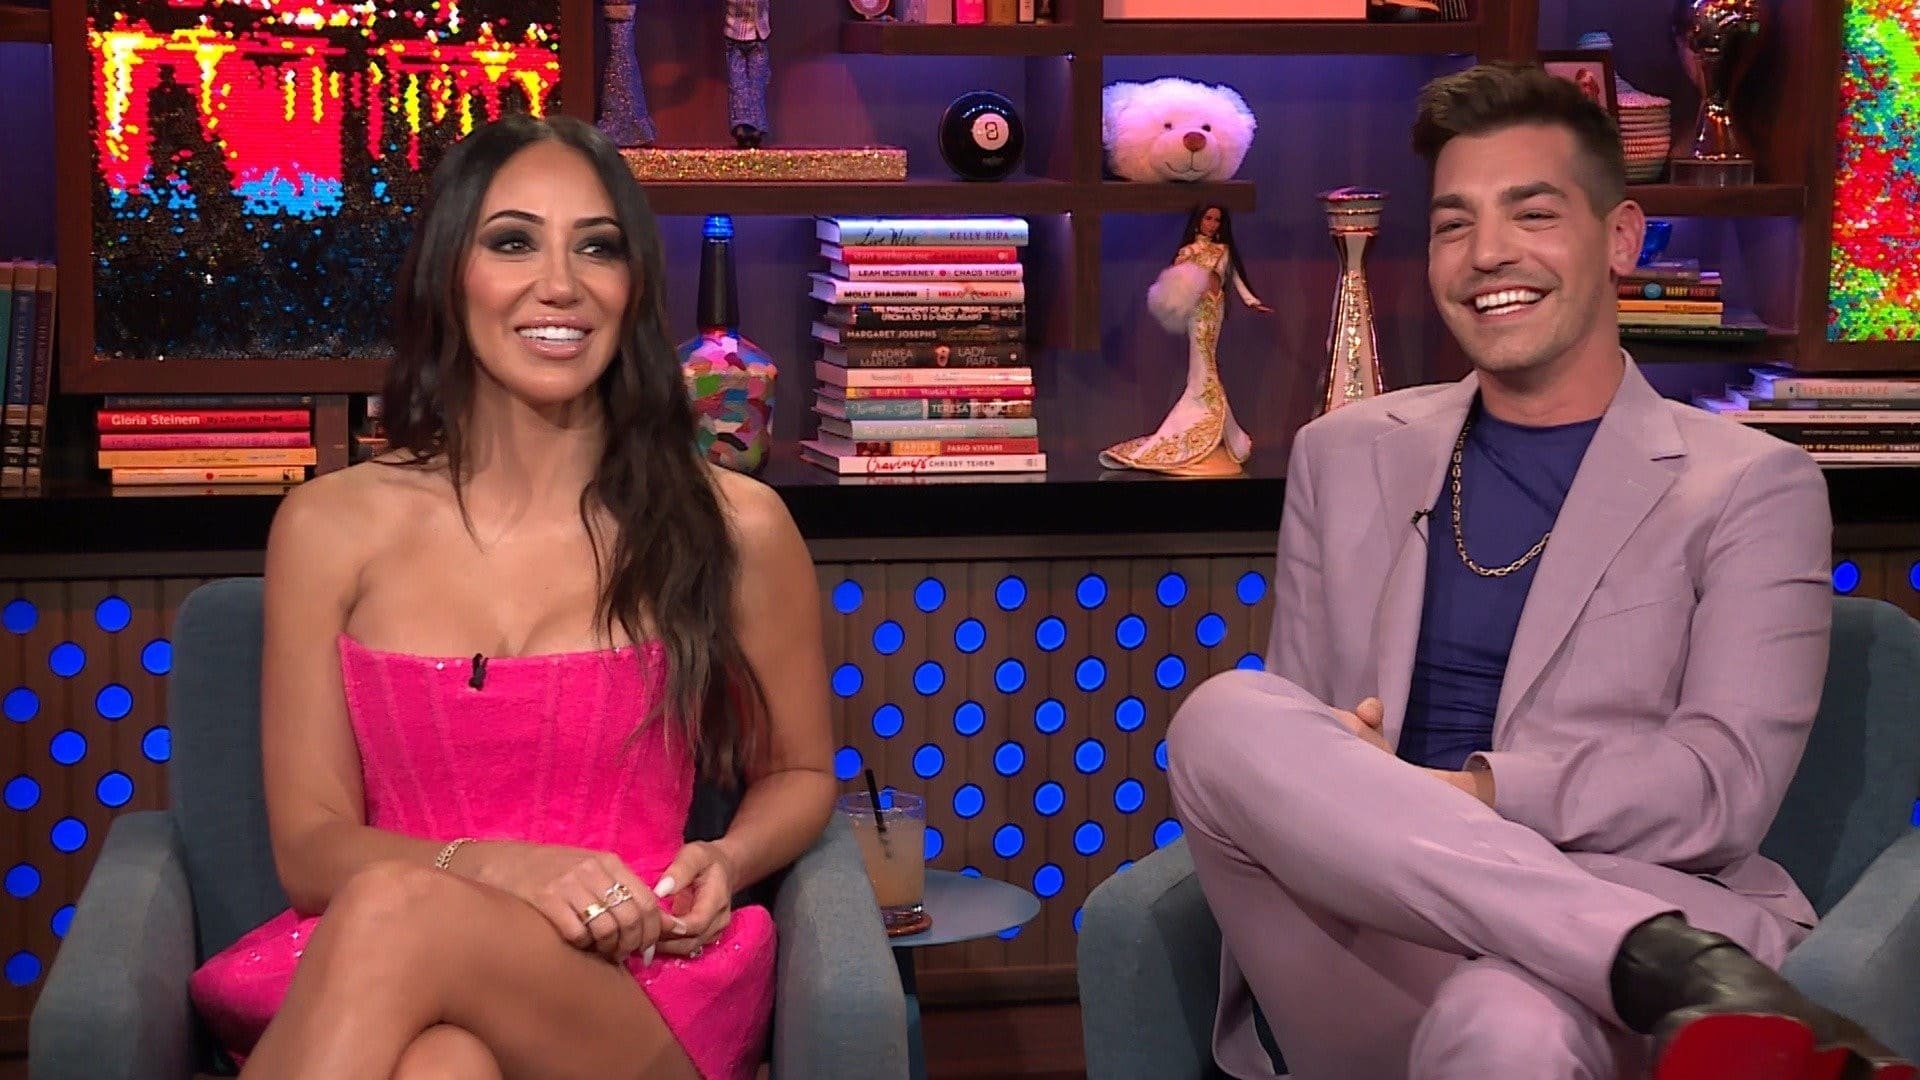 Watch What Happens Live with Andy Cohen Season 20 :Episode 35  Melissa Gorga and Matt Rogers